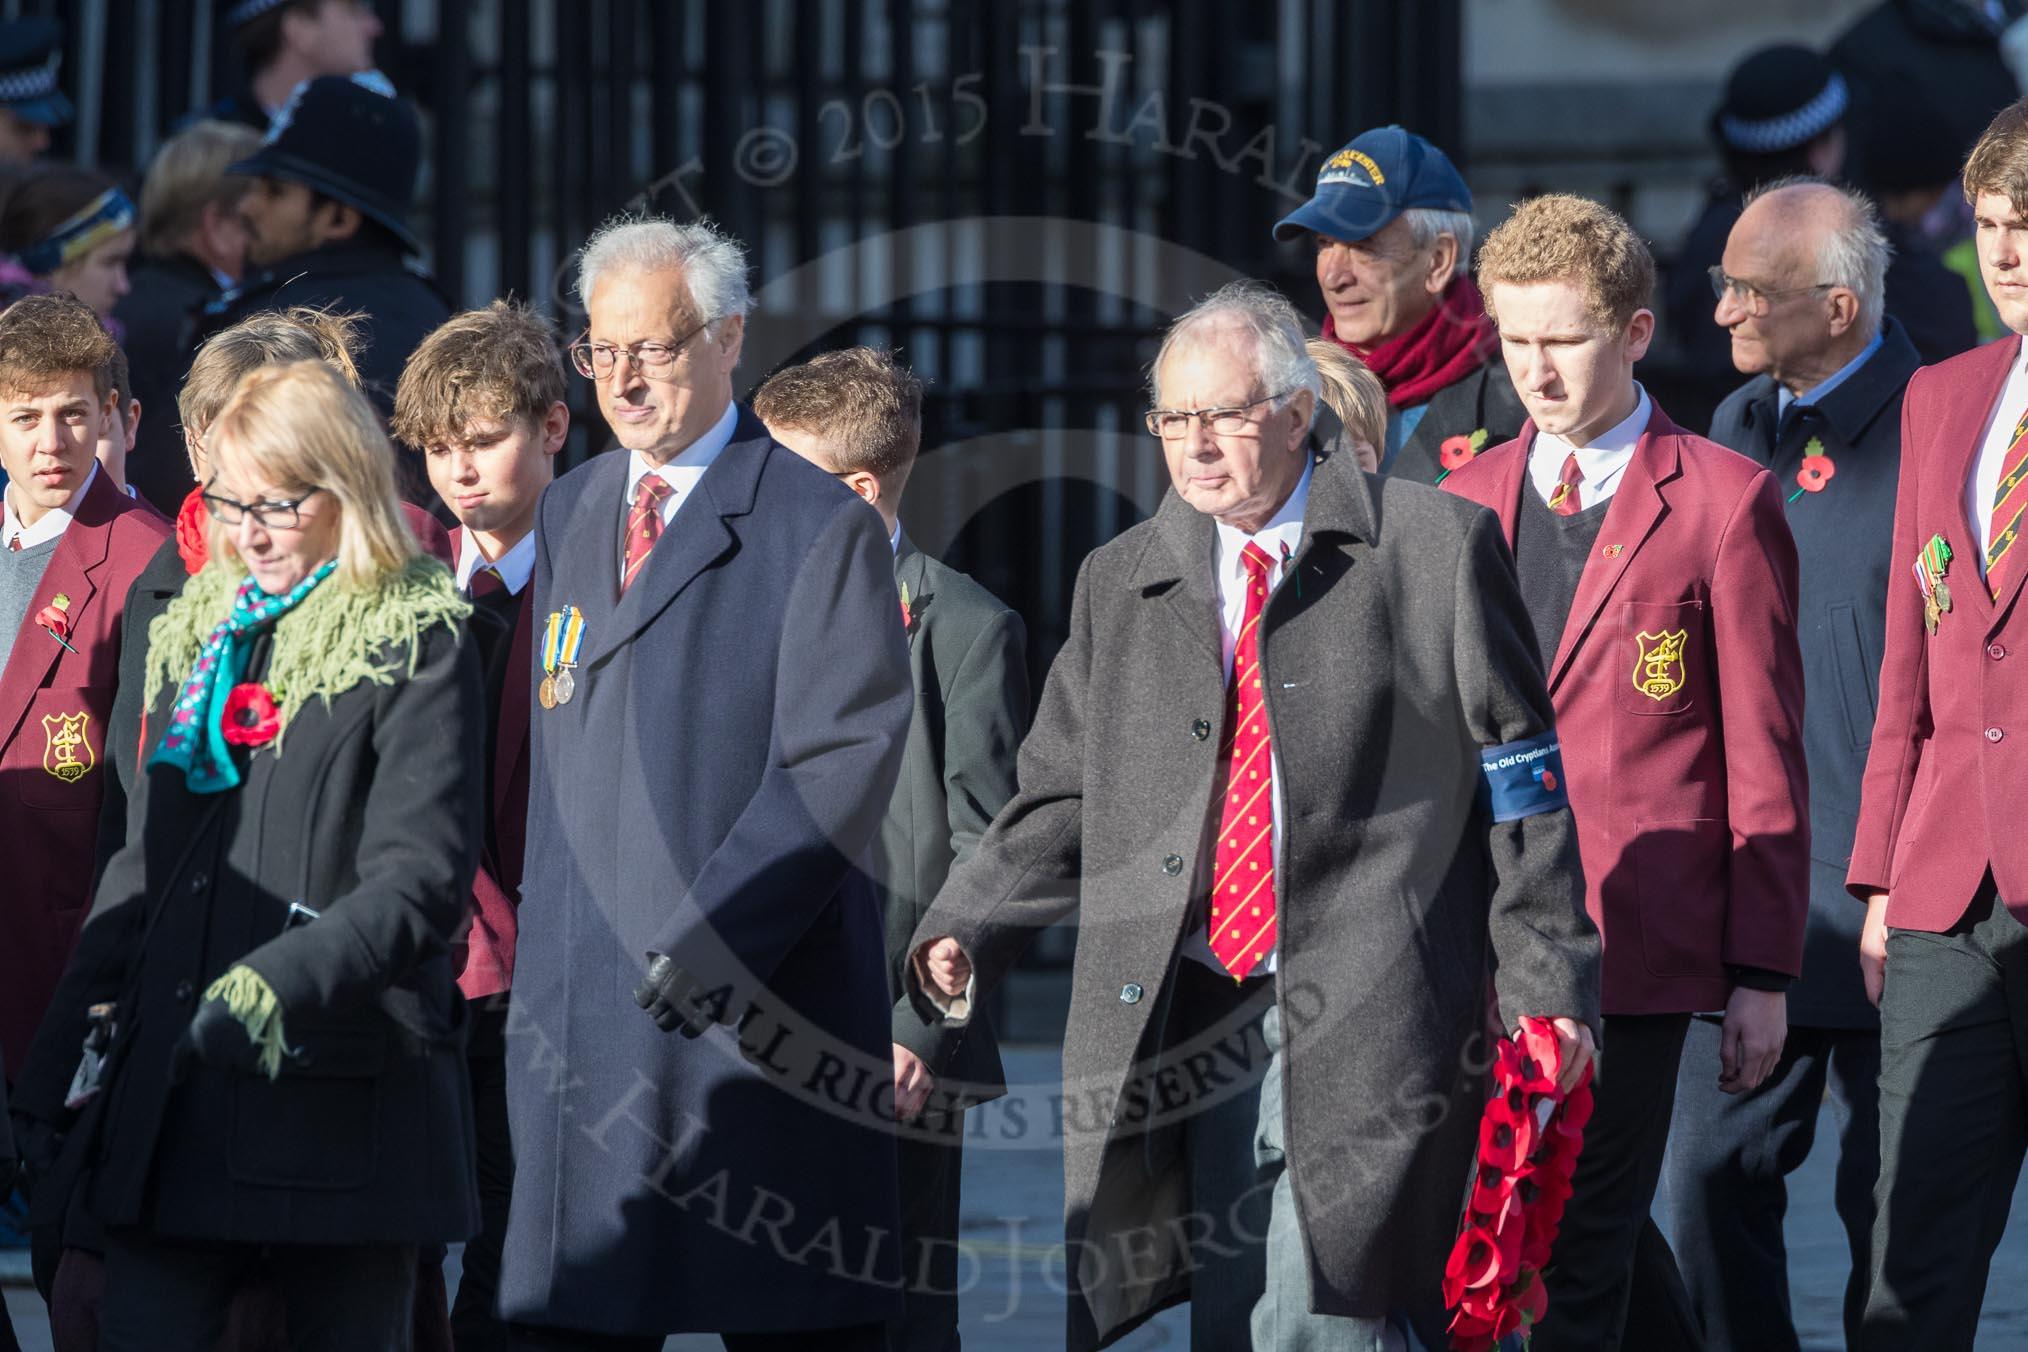 March Past, Remembrance Sunday at the Cenotaph 2016: M20 Old Cryptians' Club.
Cenotaph, Whitehall, London SW1,
London,
Greater London,
United Kingdom,
on 13 November 2016 at 13:16, image #2652